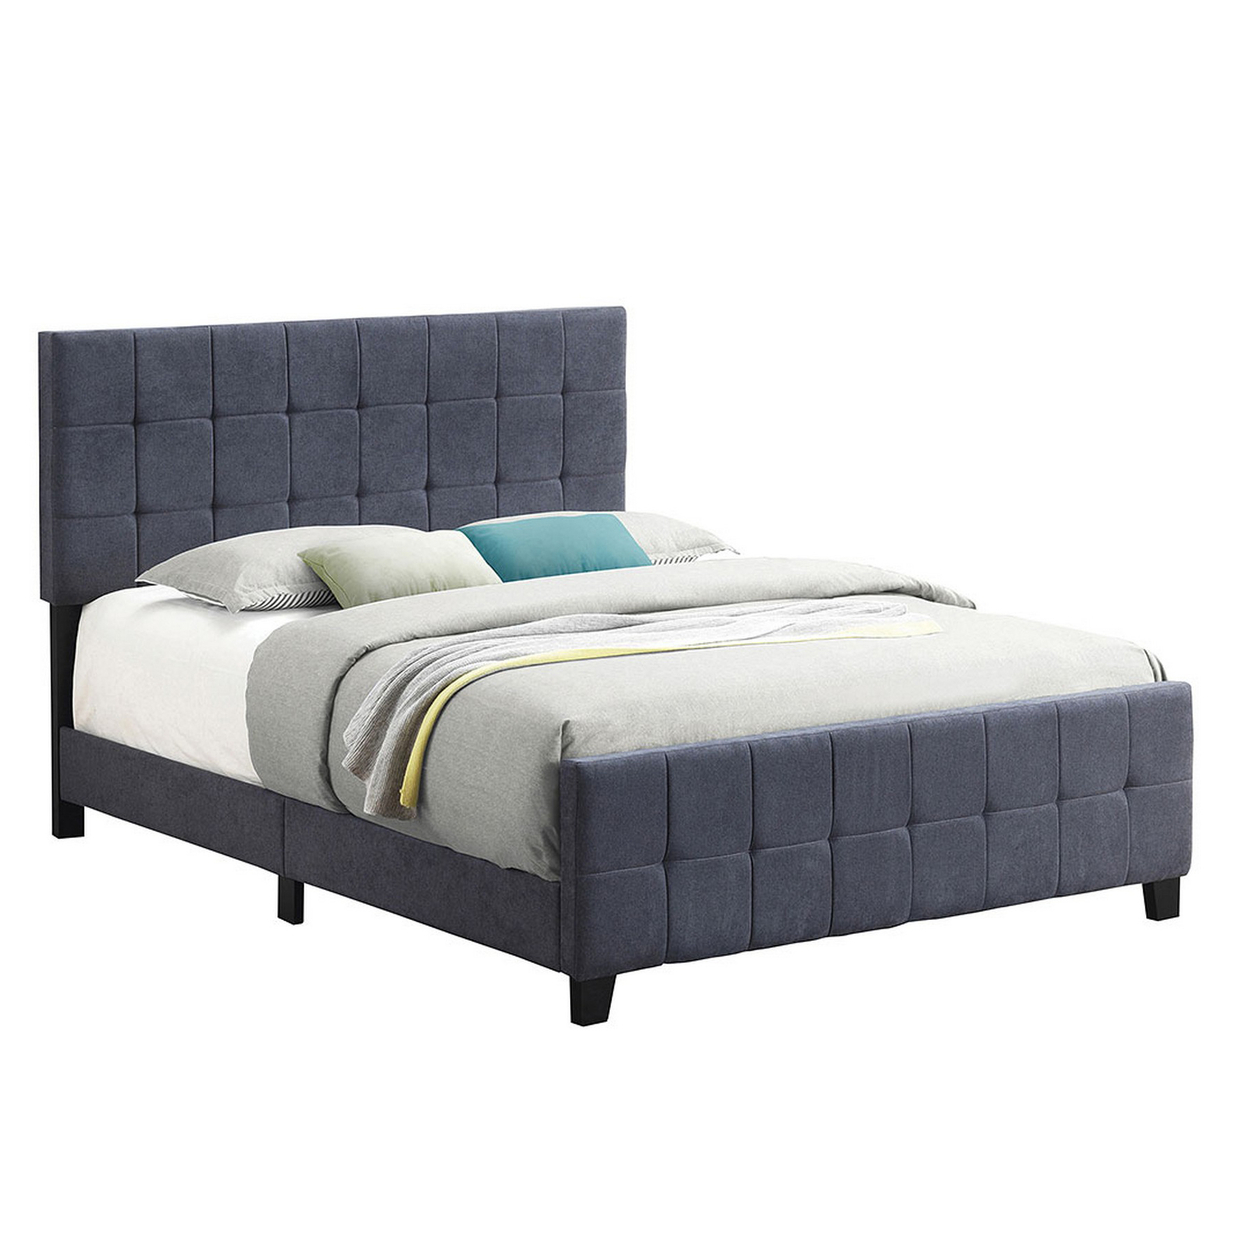 Grid Tufted Fabric Upholstered Queen Bed, Gray- Saltoro Sherpi